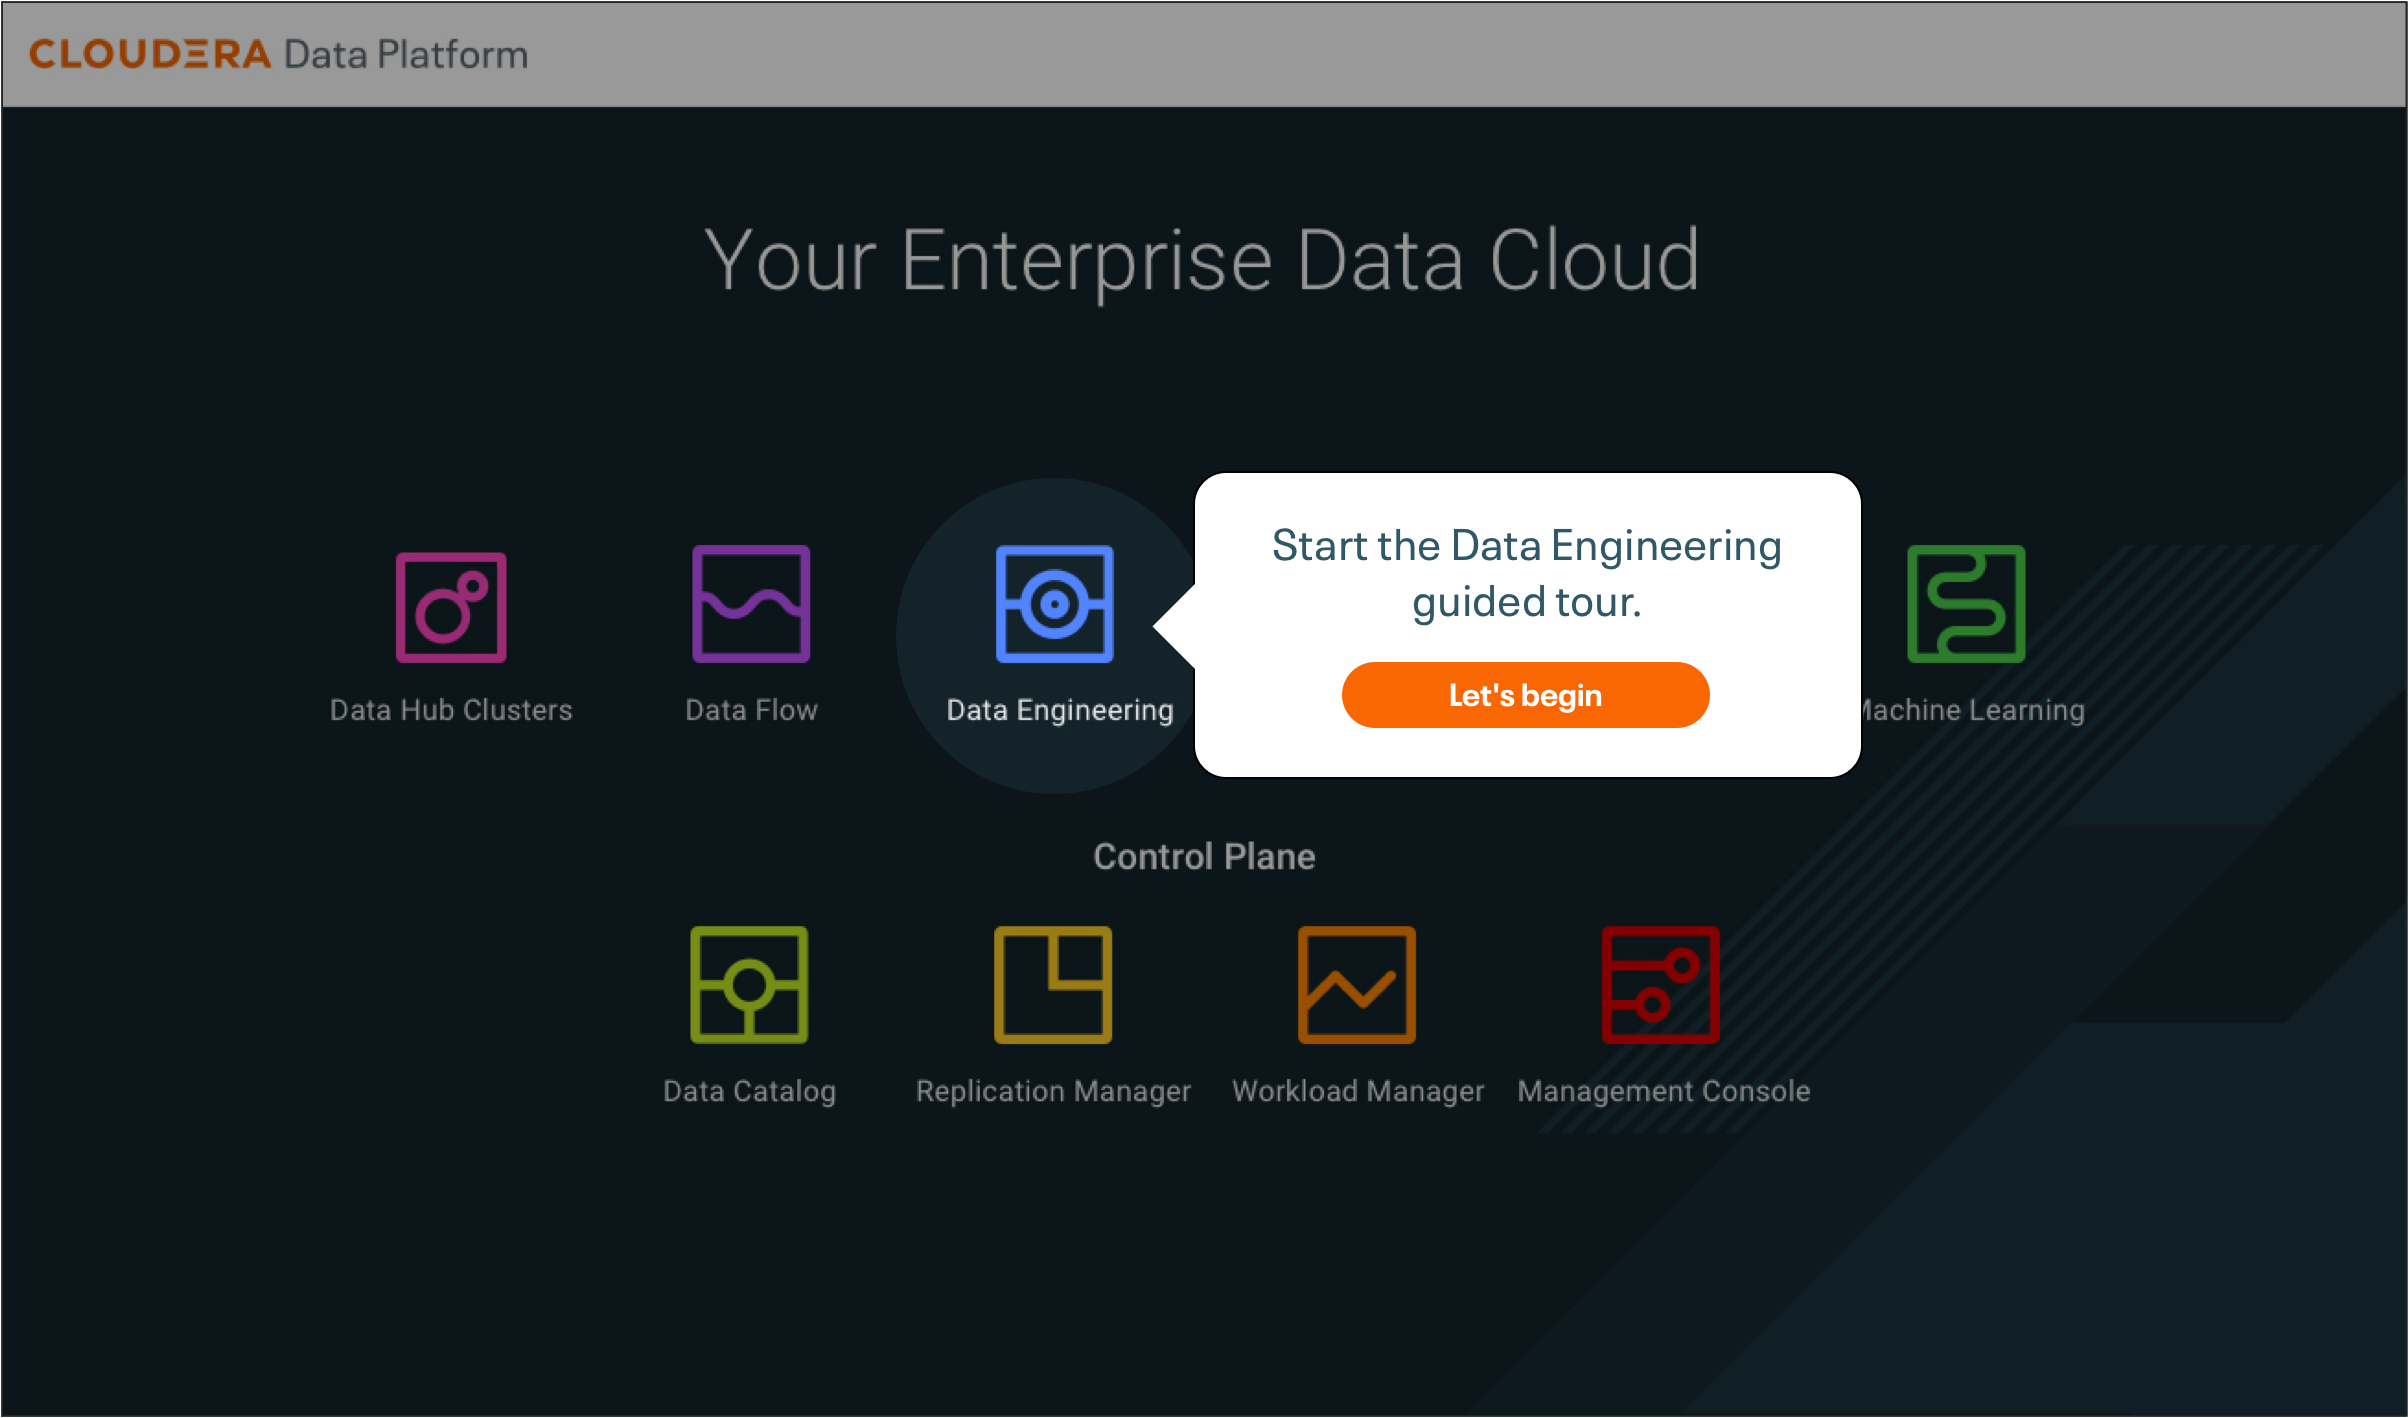 Take the guided tour of Data Engineering